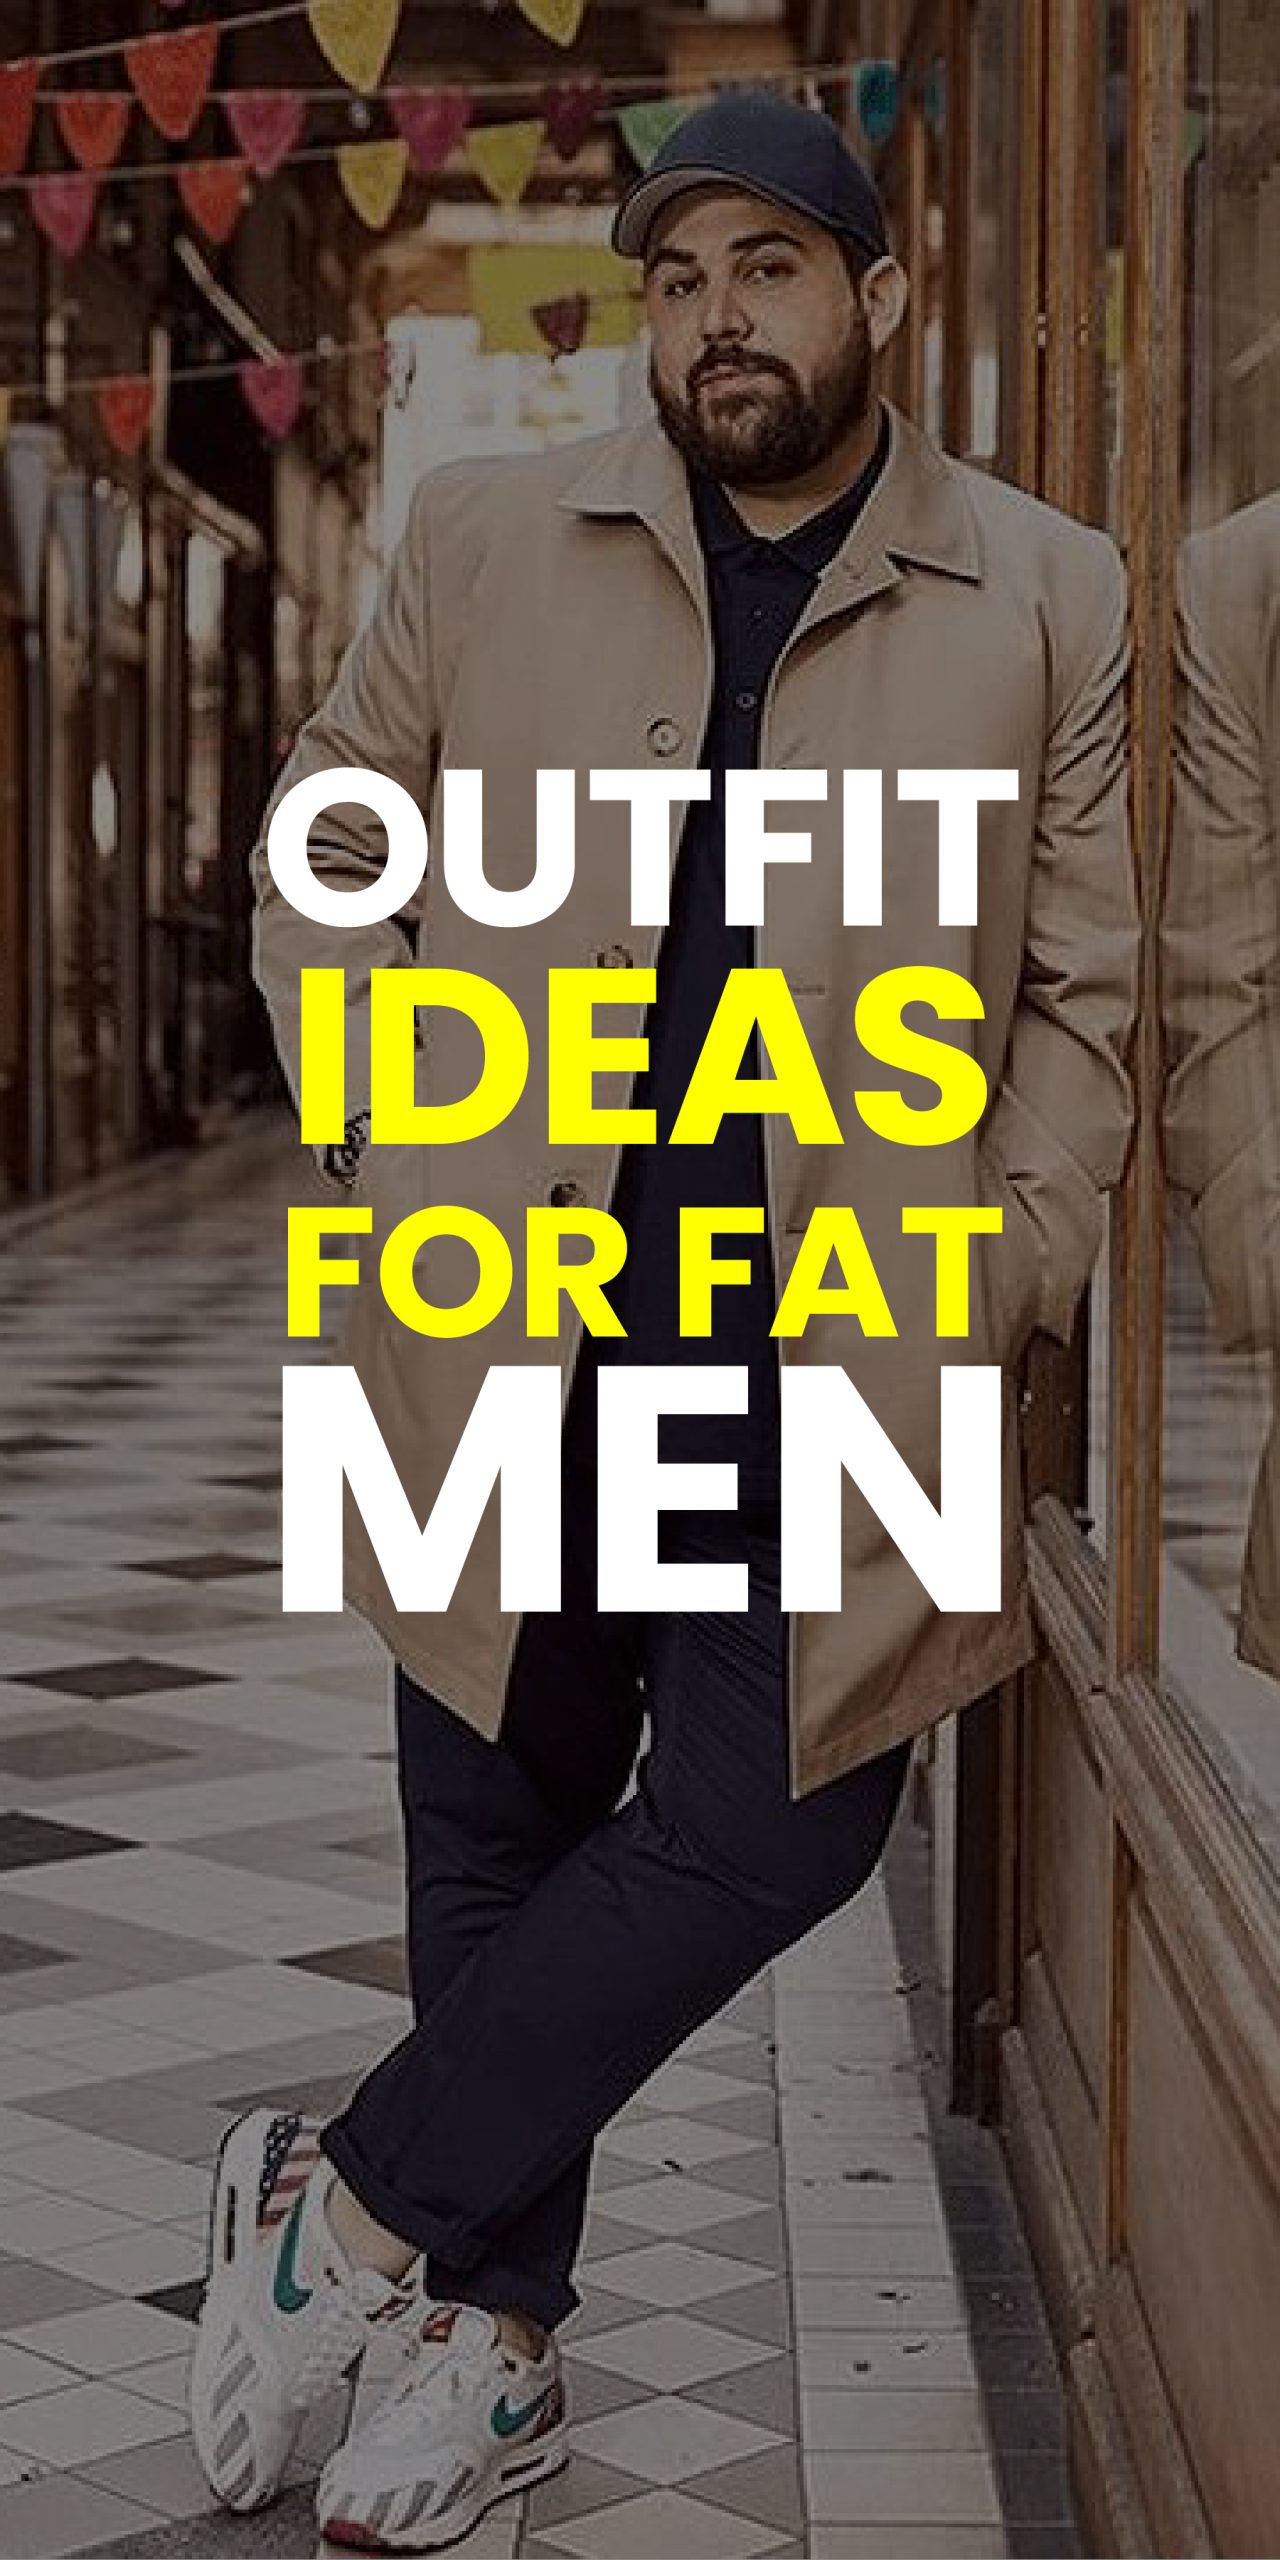 OUTFIT IDEAS FOR FAT MEN